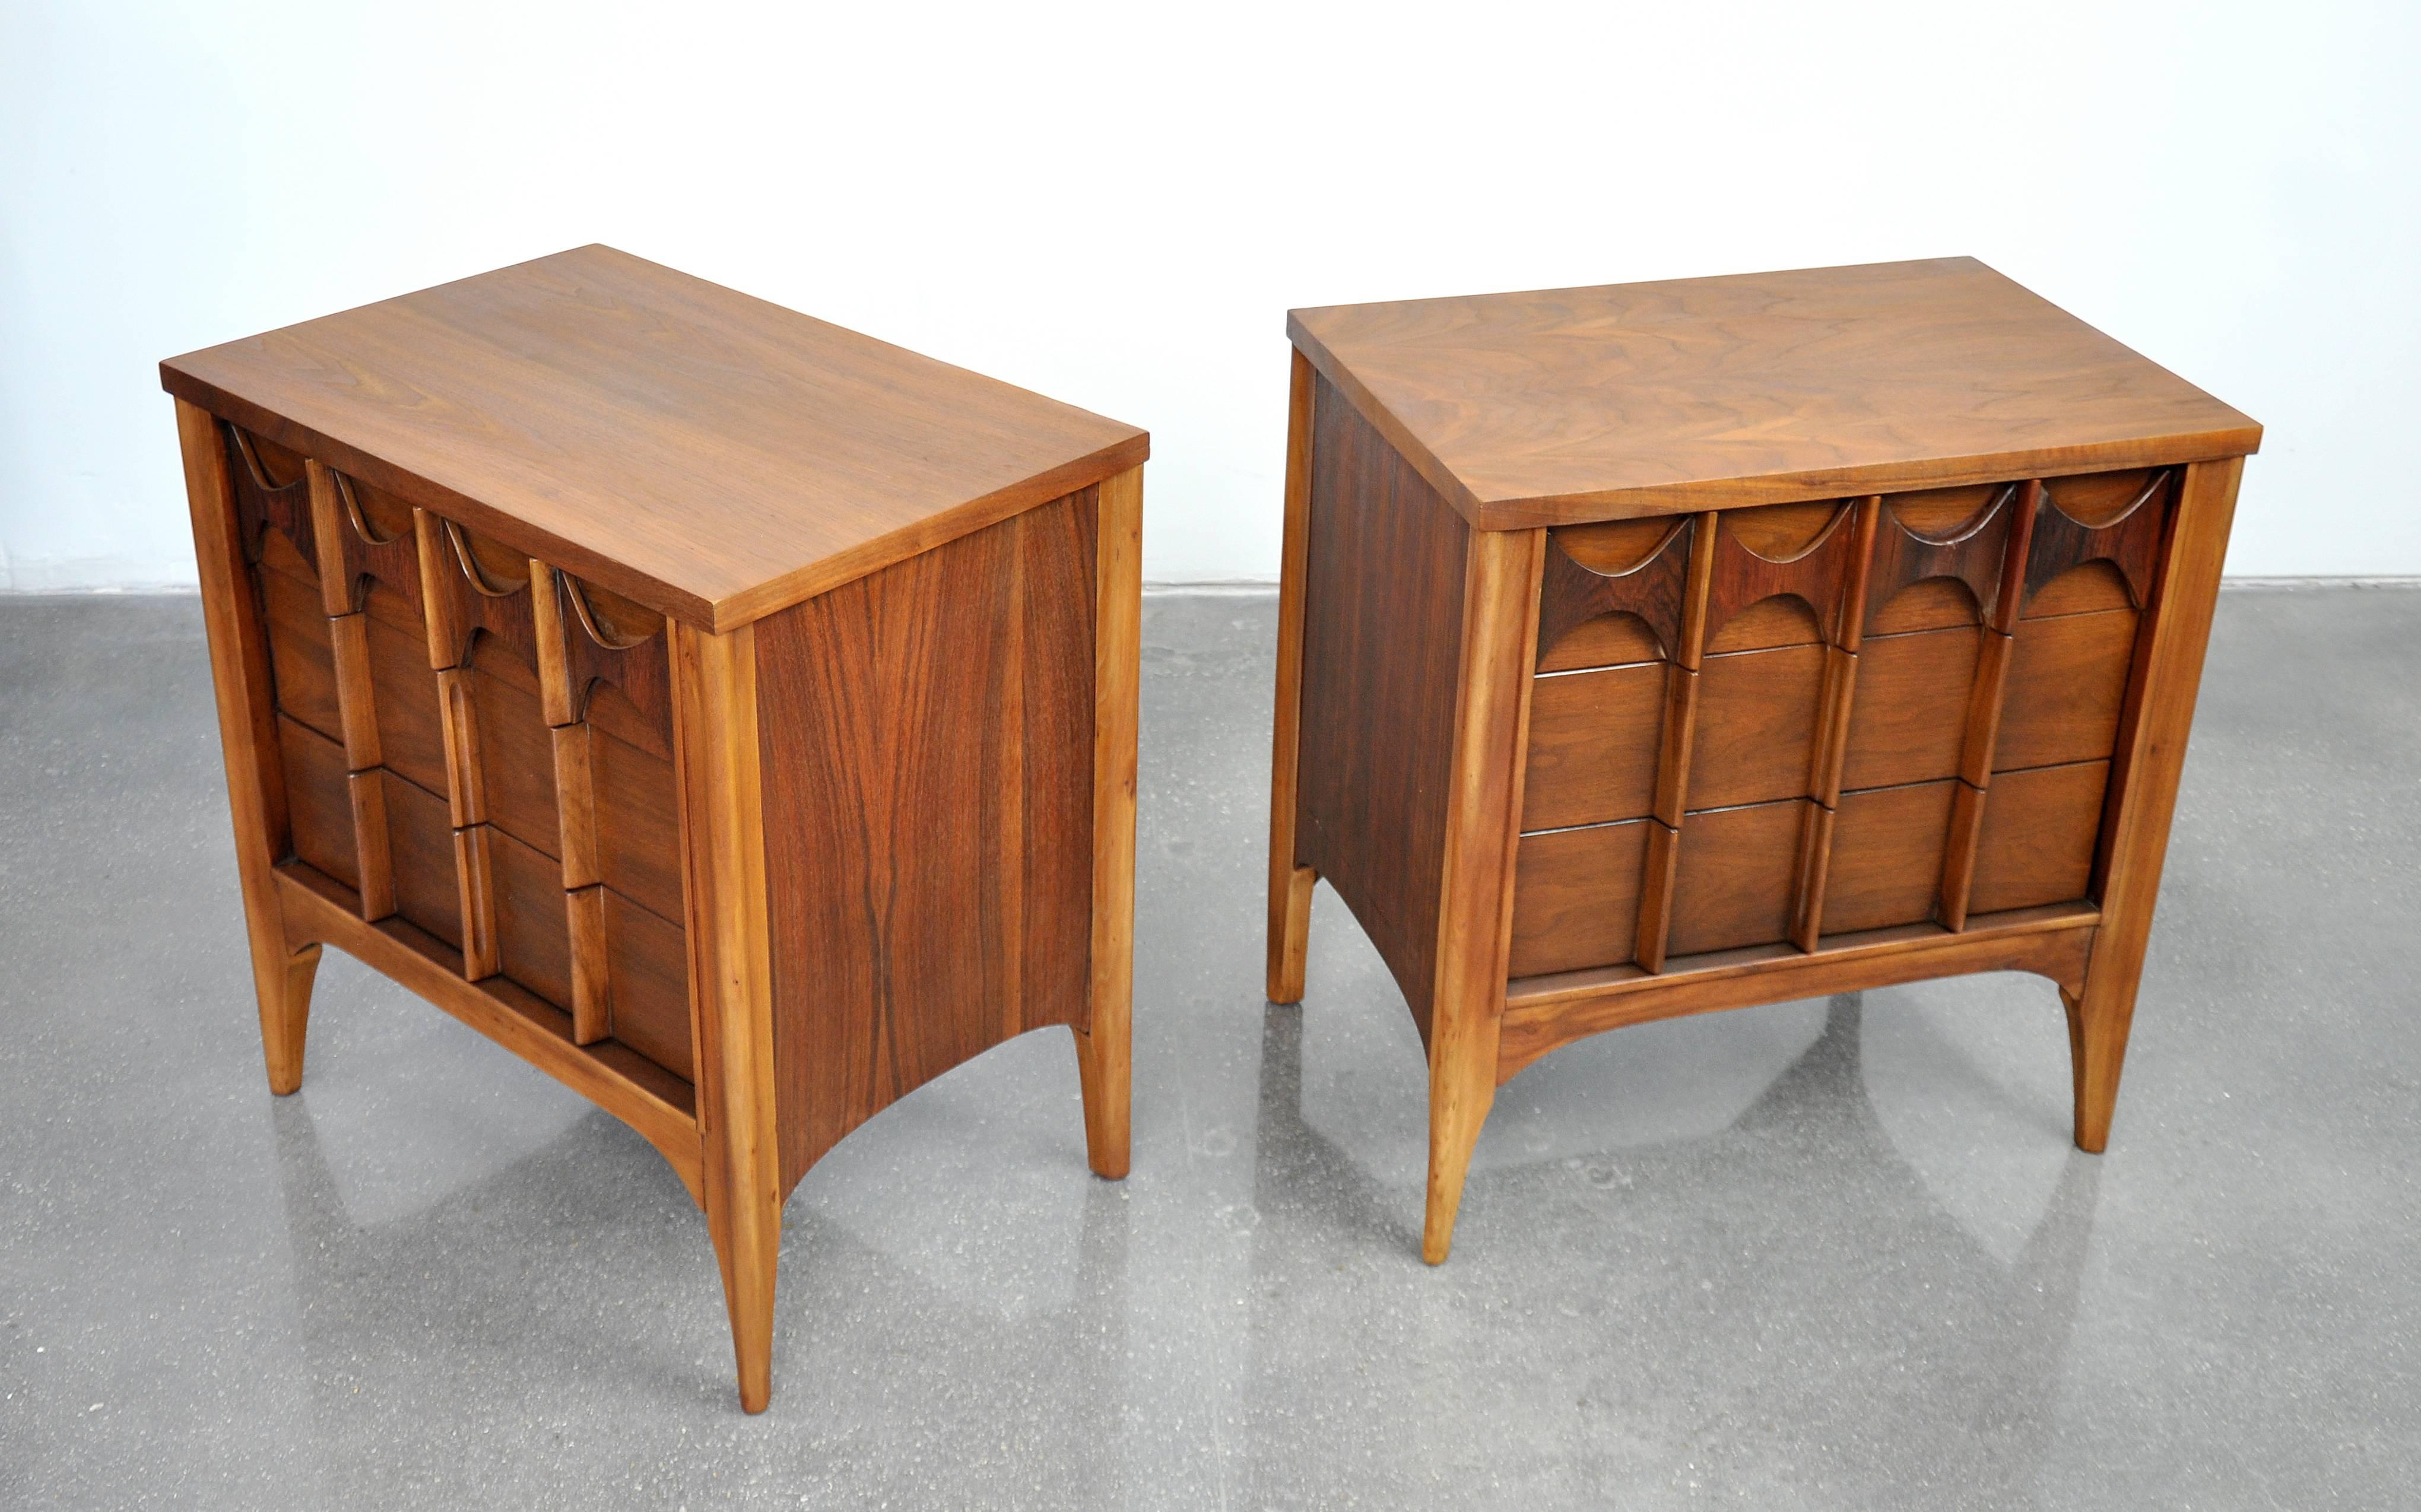 Beautiful pair of vintage Mid-Century Modern bedside tables. Each night stand features three drawers with beautifully grained, bookmatched walnut and signature sculpted, relief carved rosewood accents. Could also be used as side or end tables.